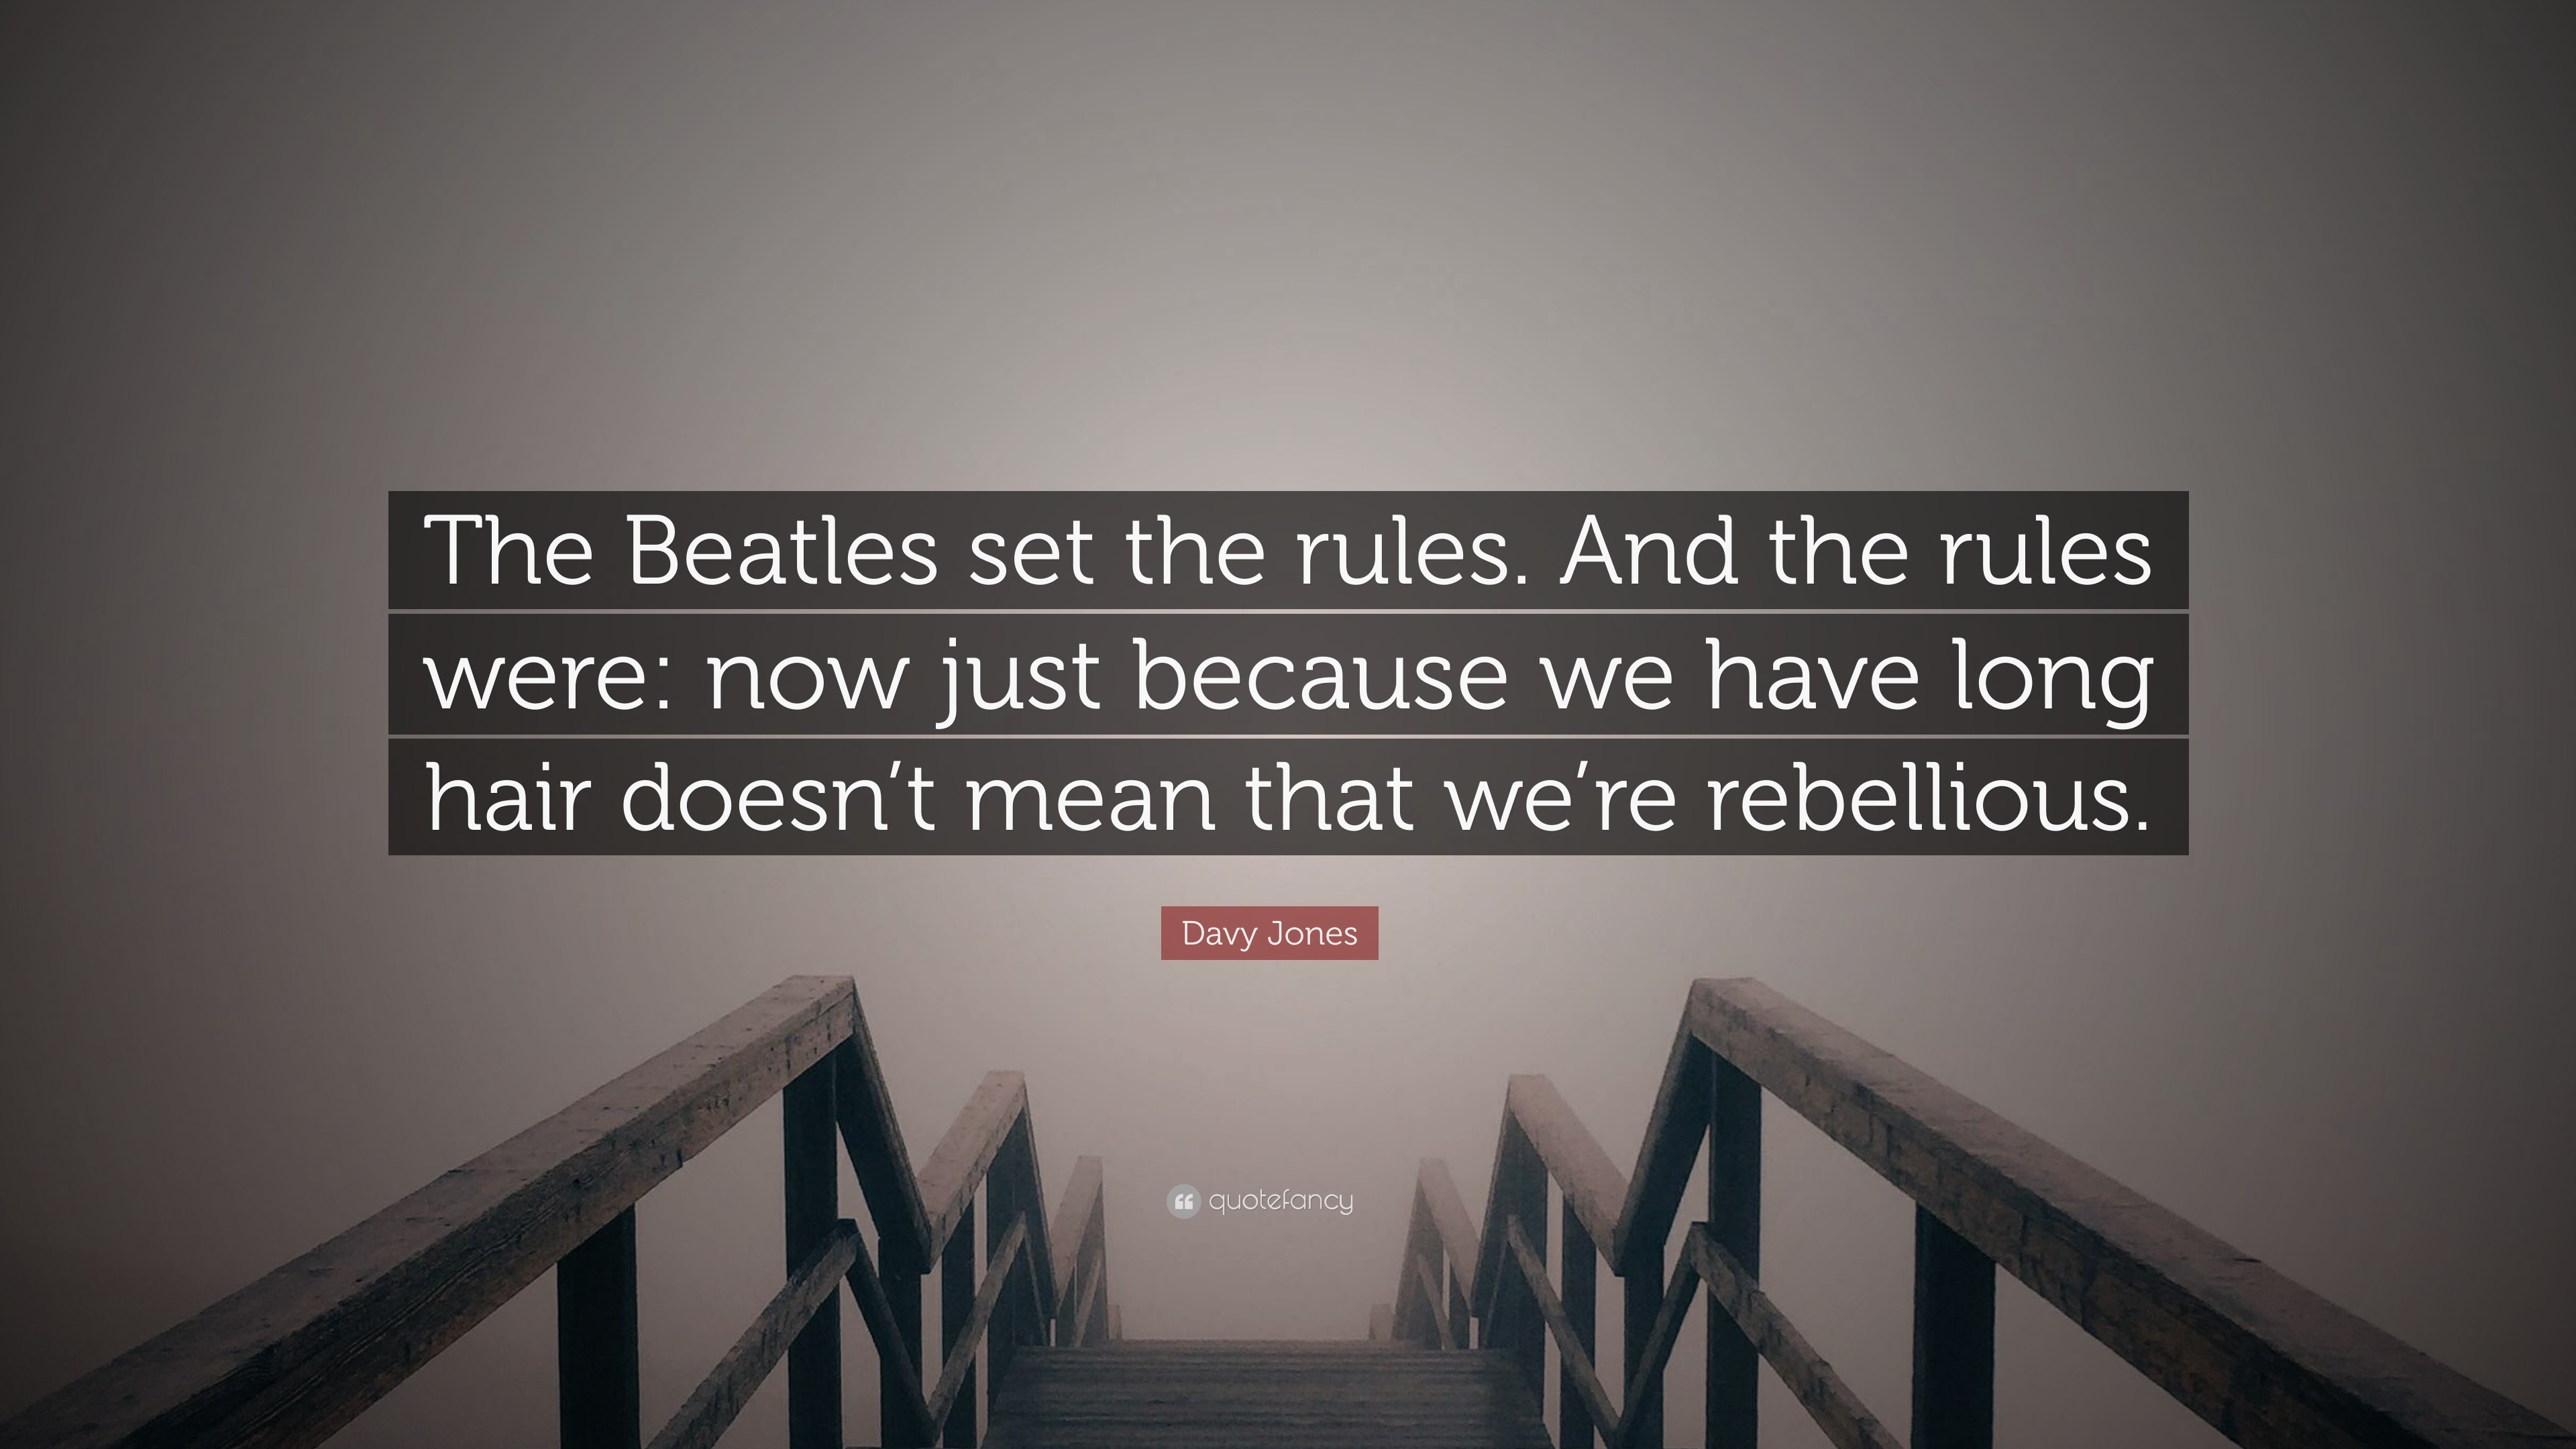 3840x2160 Davy Jones Quote: “The Beatles set the rules. And the rules were: